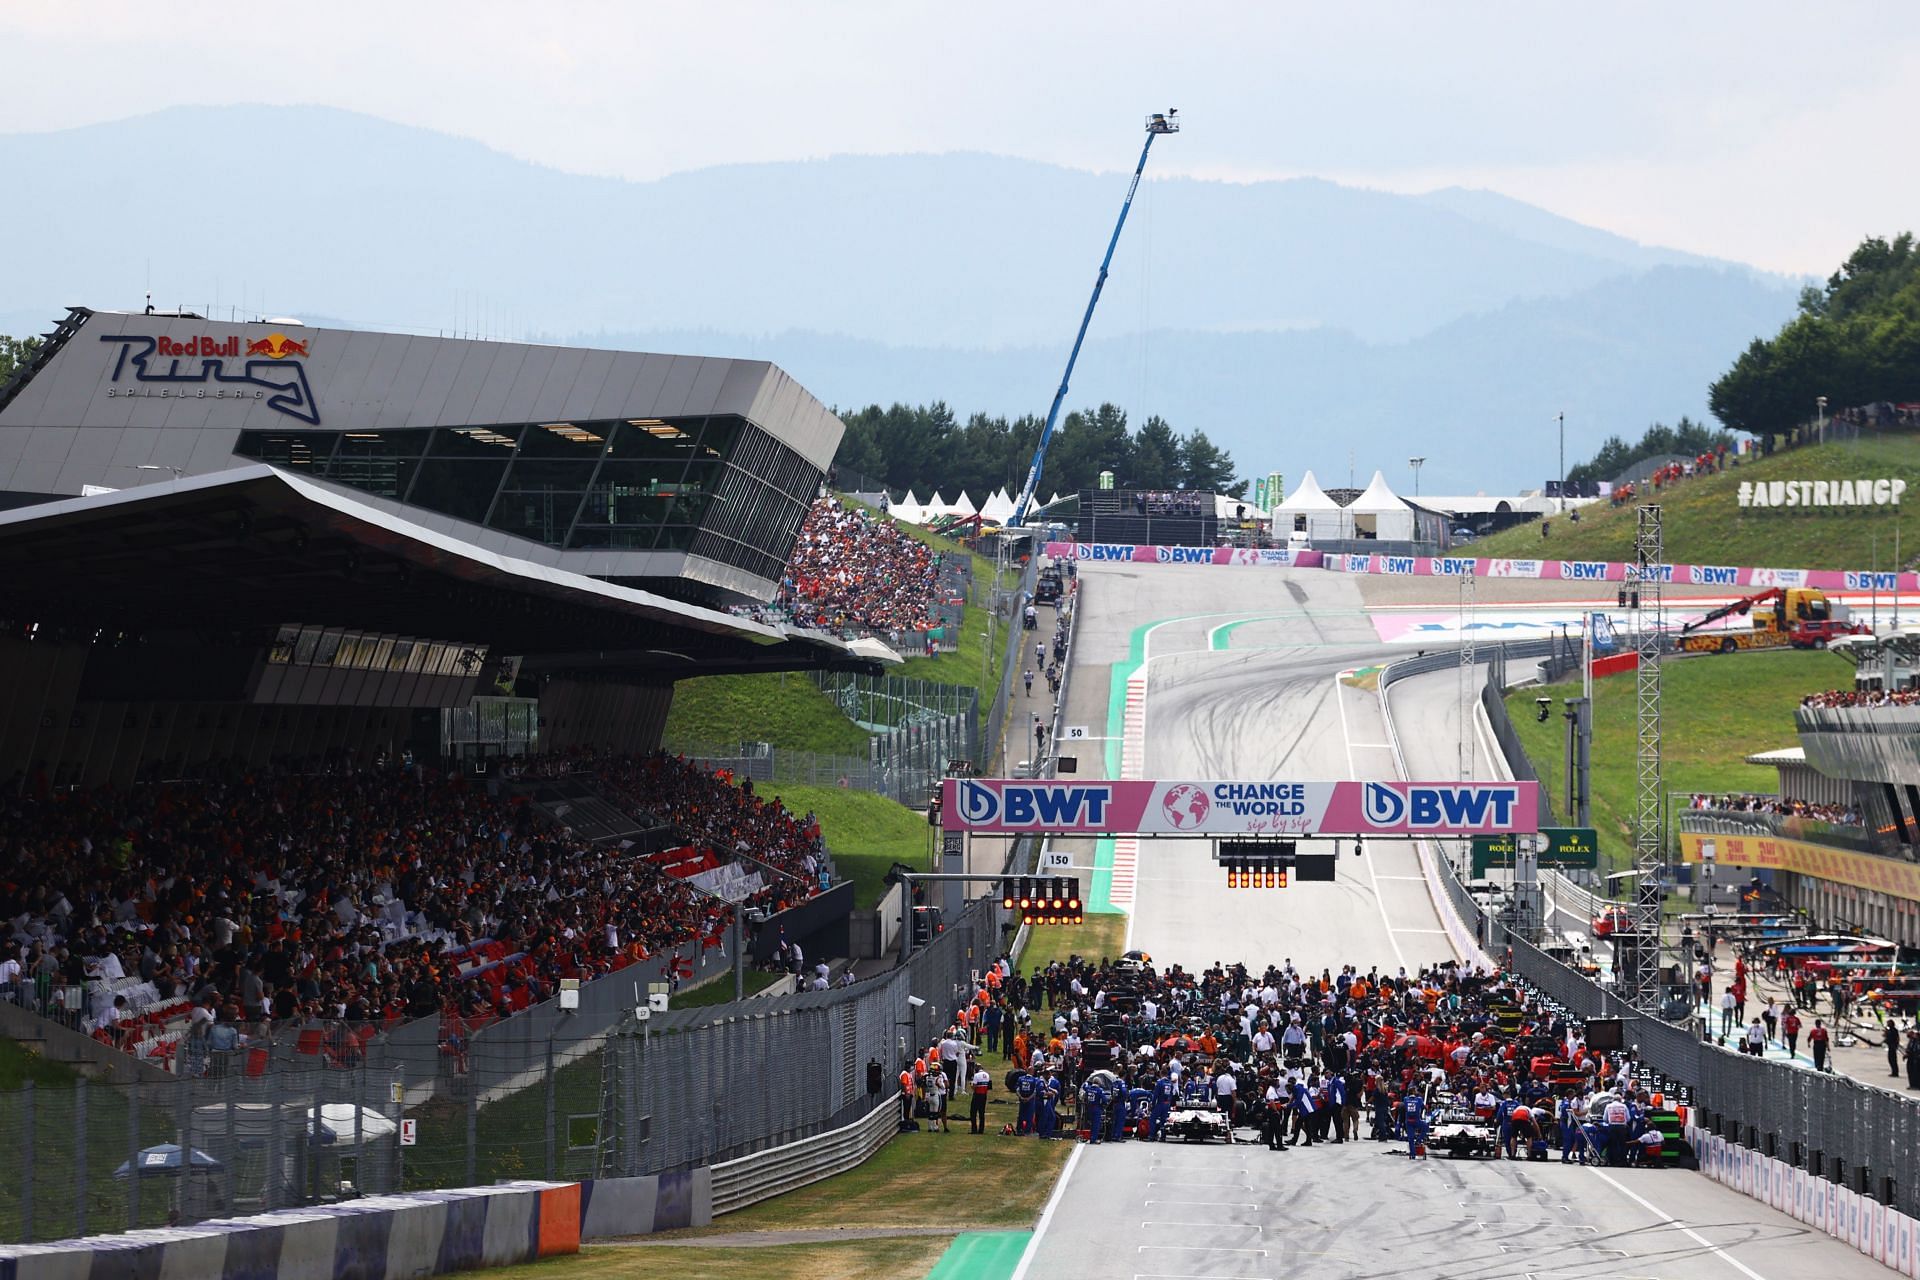 A general view of the grid at the 2021 Grand Prix of Austria